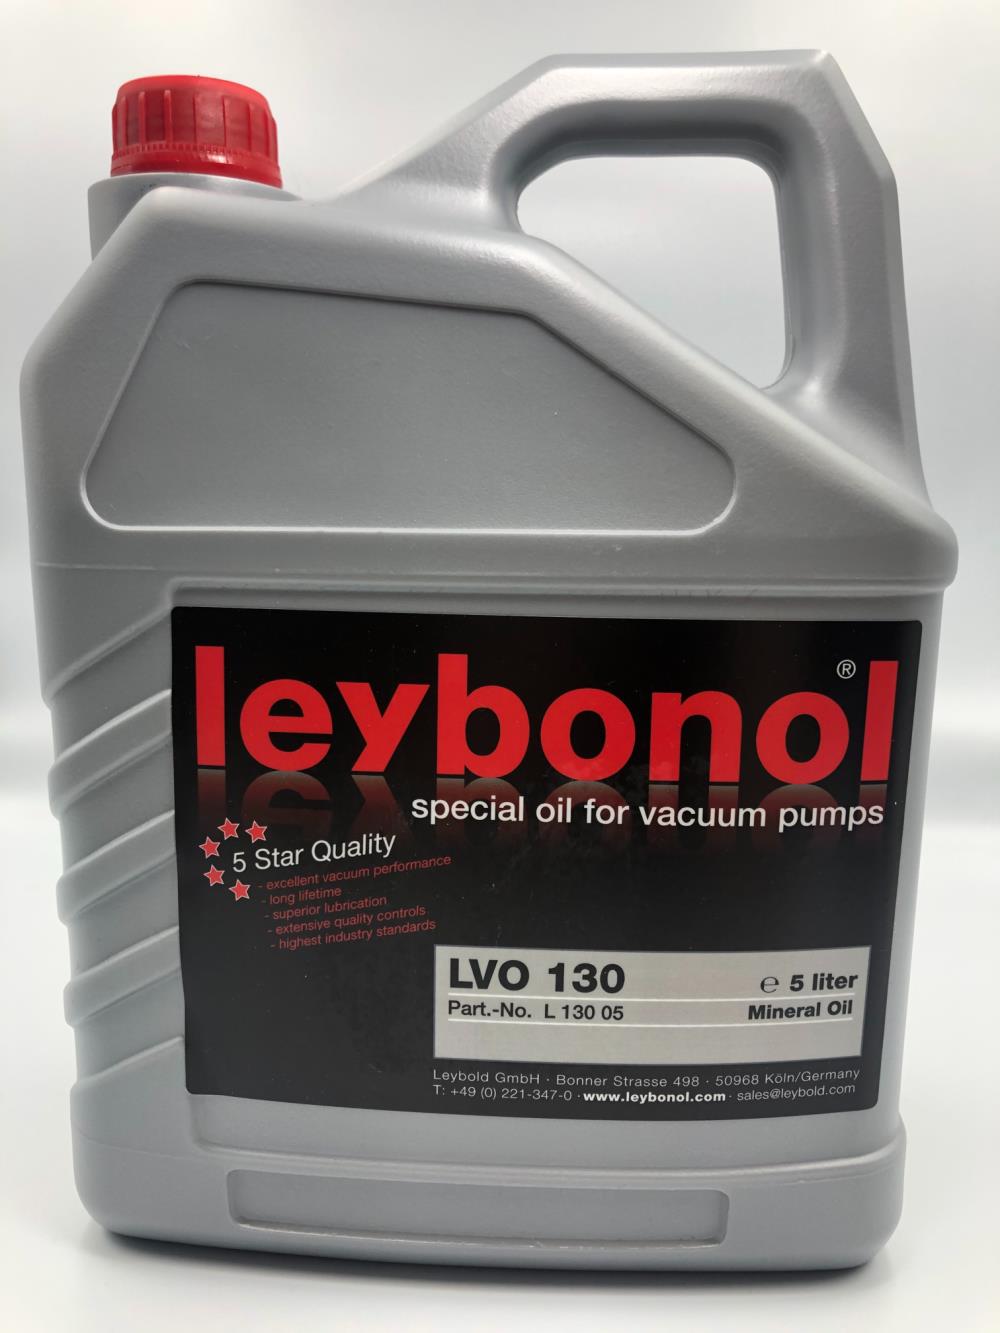 LVO130 LEYBONOL Vacuum Oil น้ำมันสุญญากาศ,Vacuum oil, LVO130, น้ำมันสุญญากาศ,น้ำมันหล่อลื่นแวคคั่ม,Leybold,Hardware and Consumable/Industrial Oil and Lube